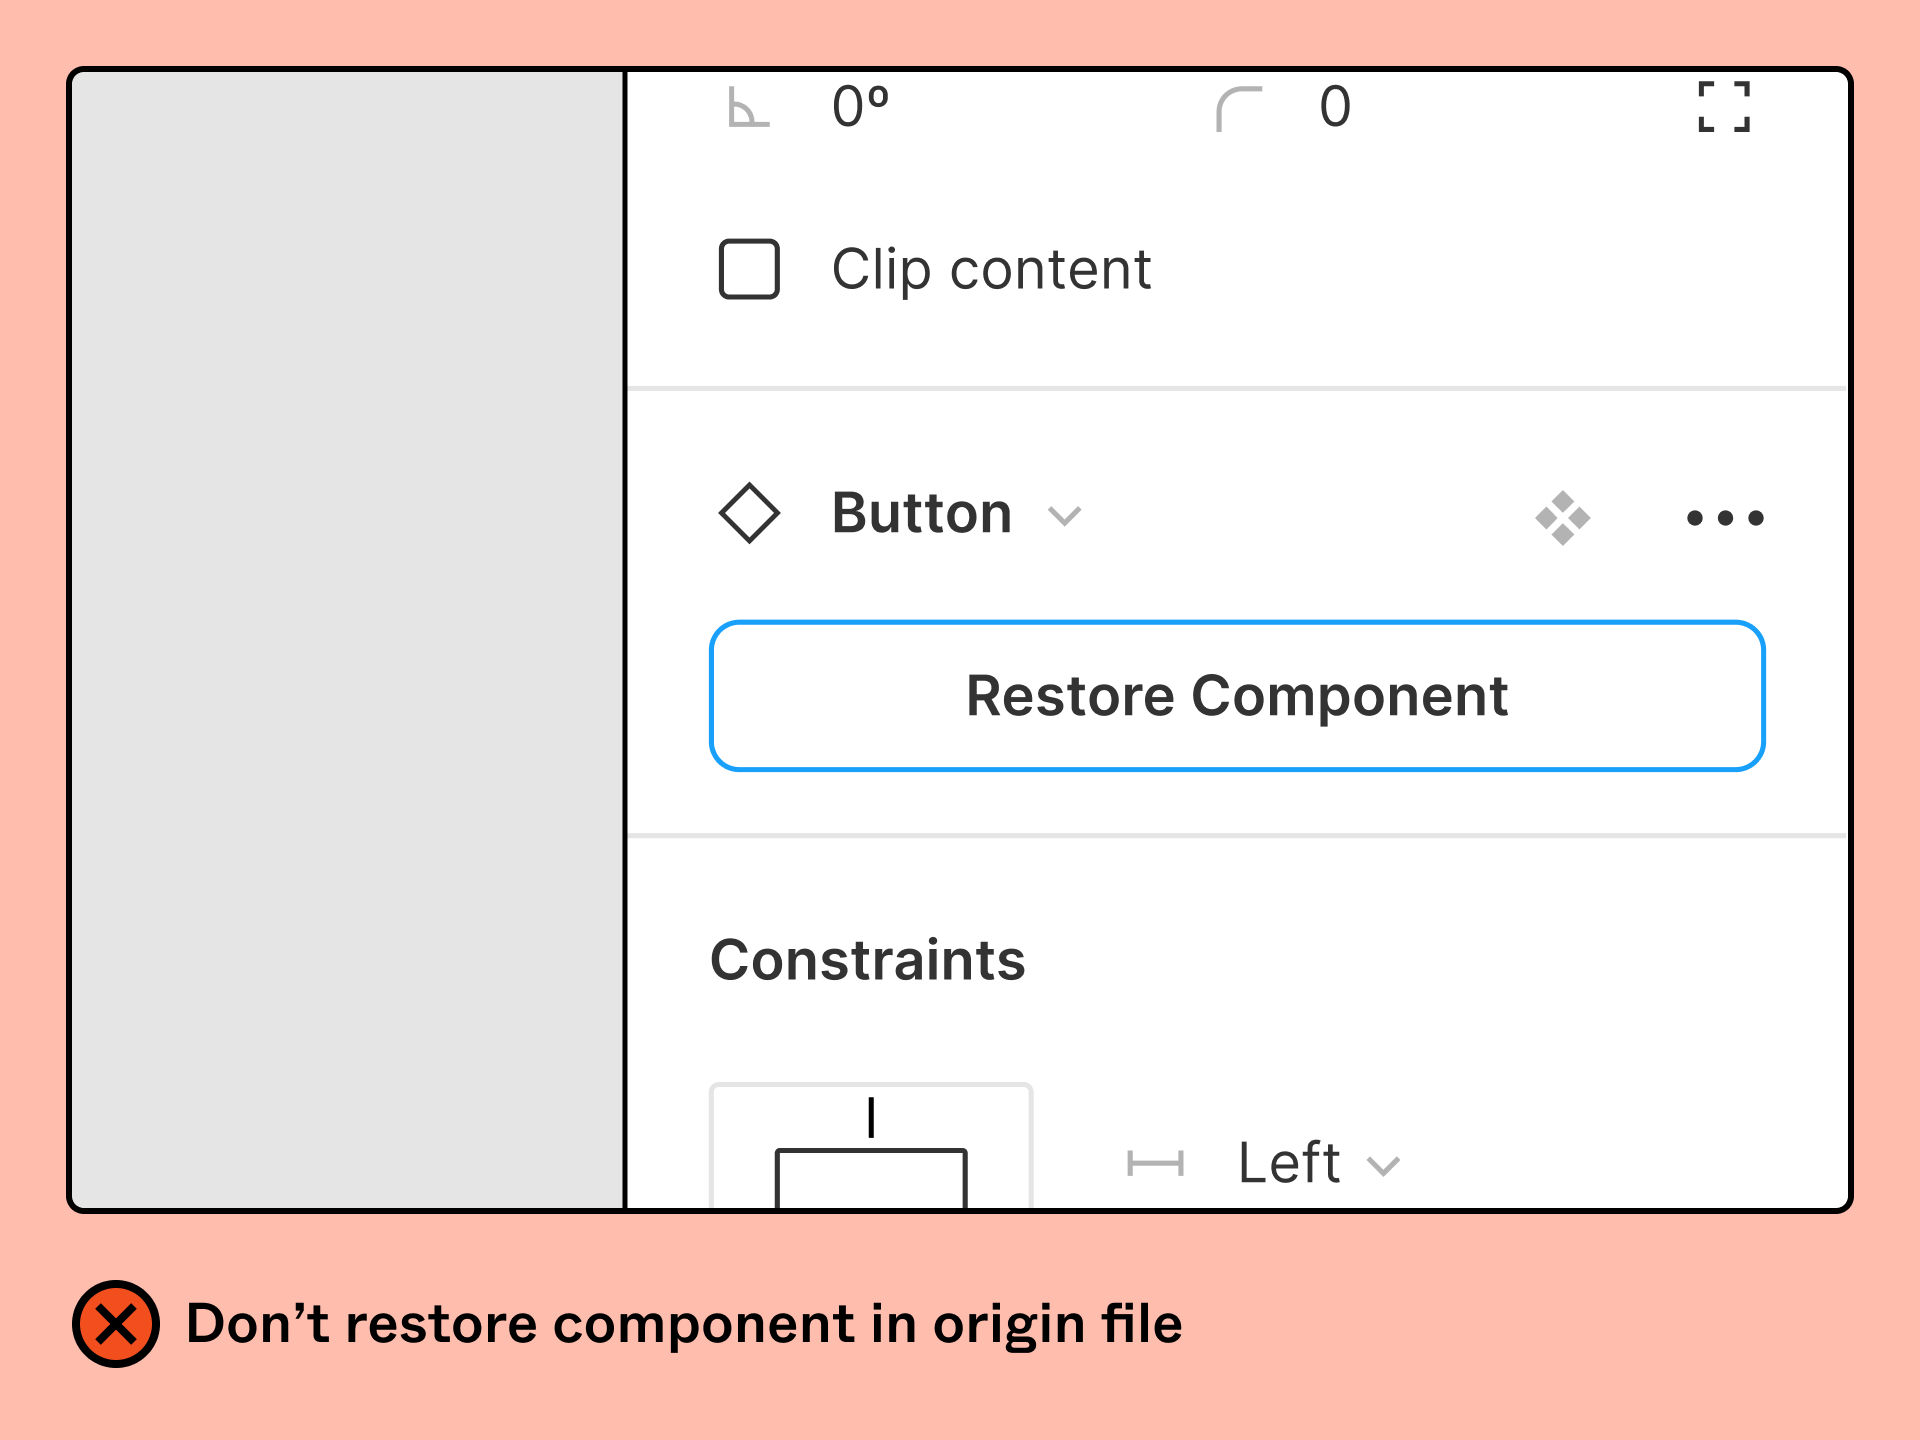 The restore component button will appear in the right sidebar but don't click this